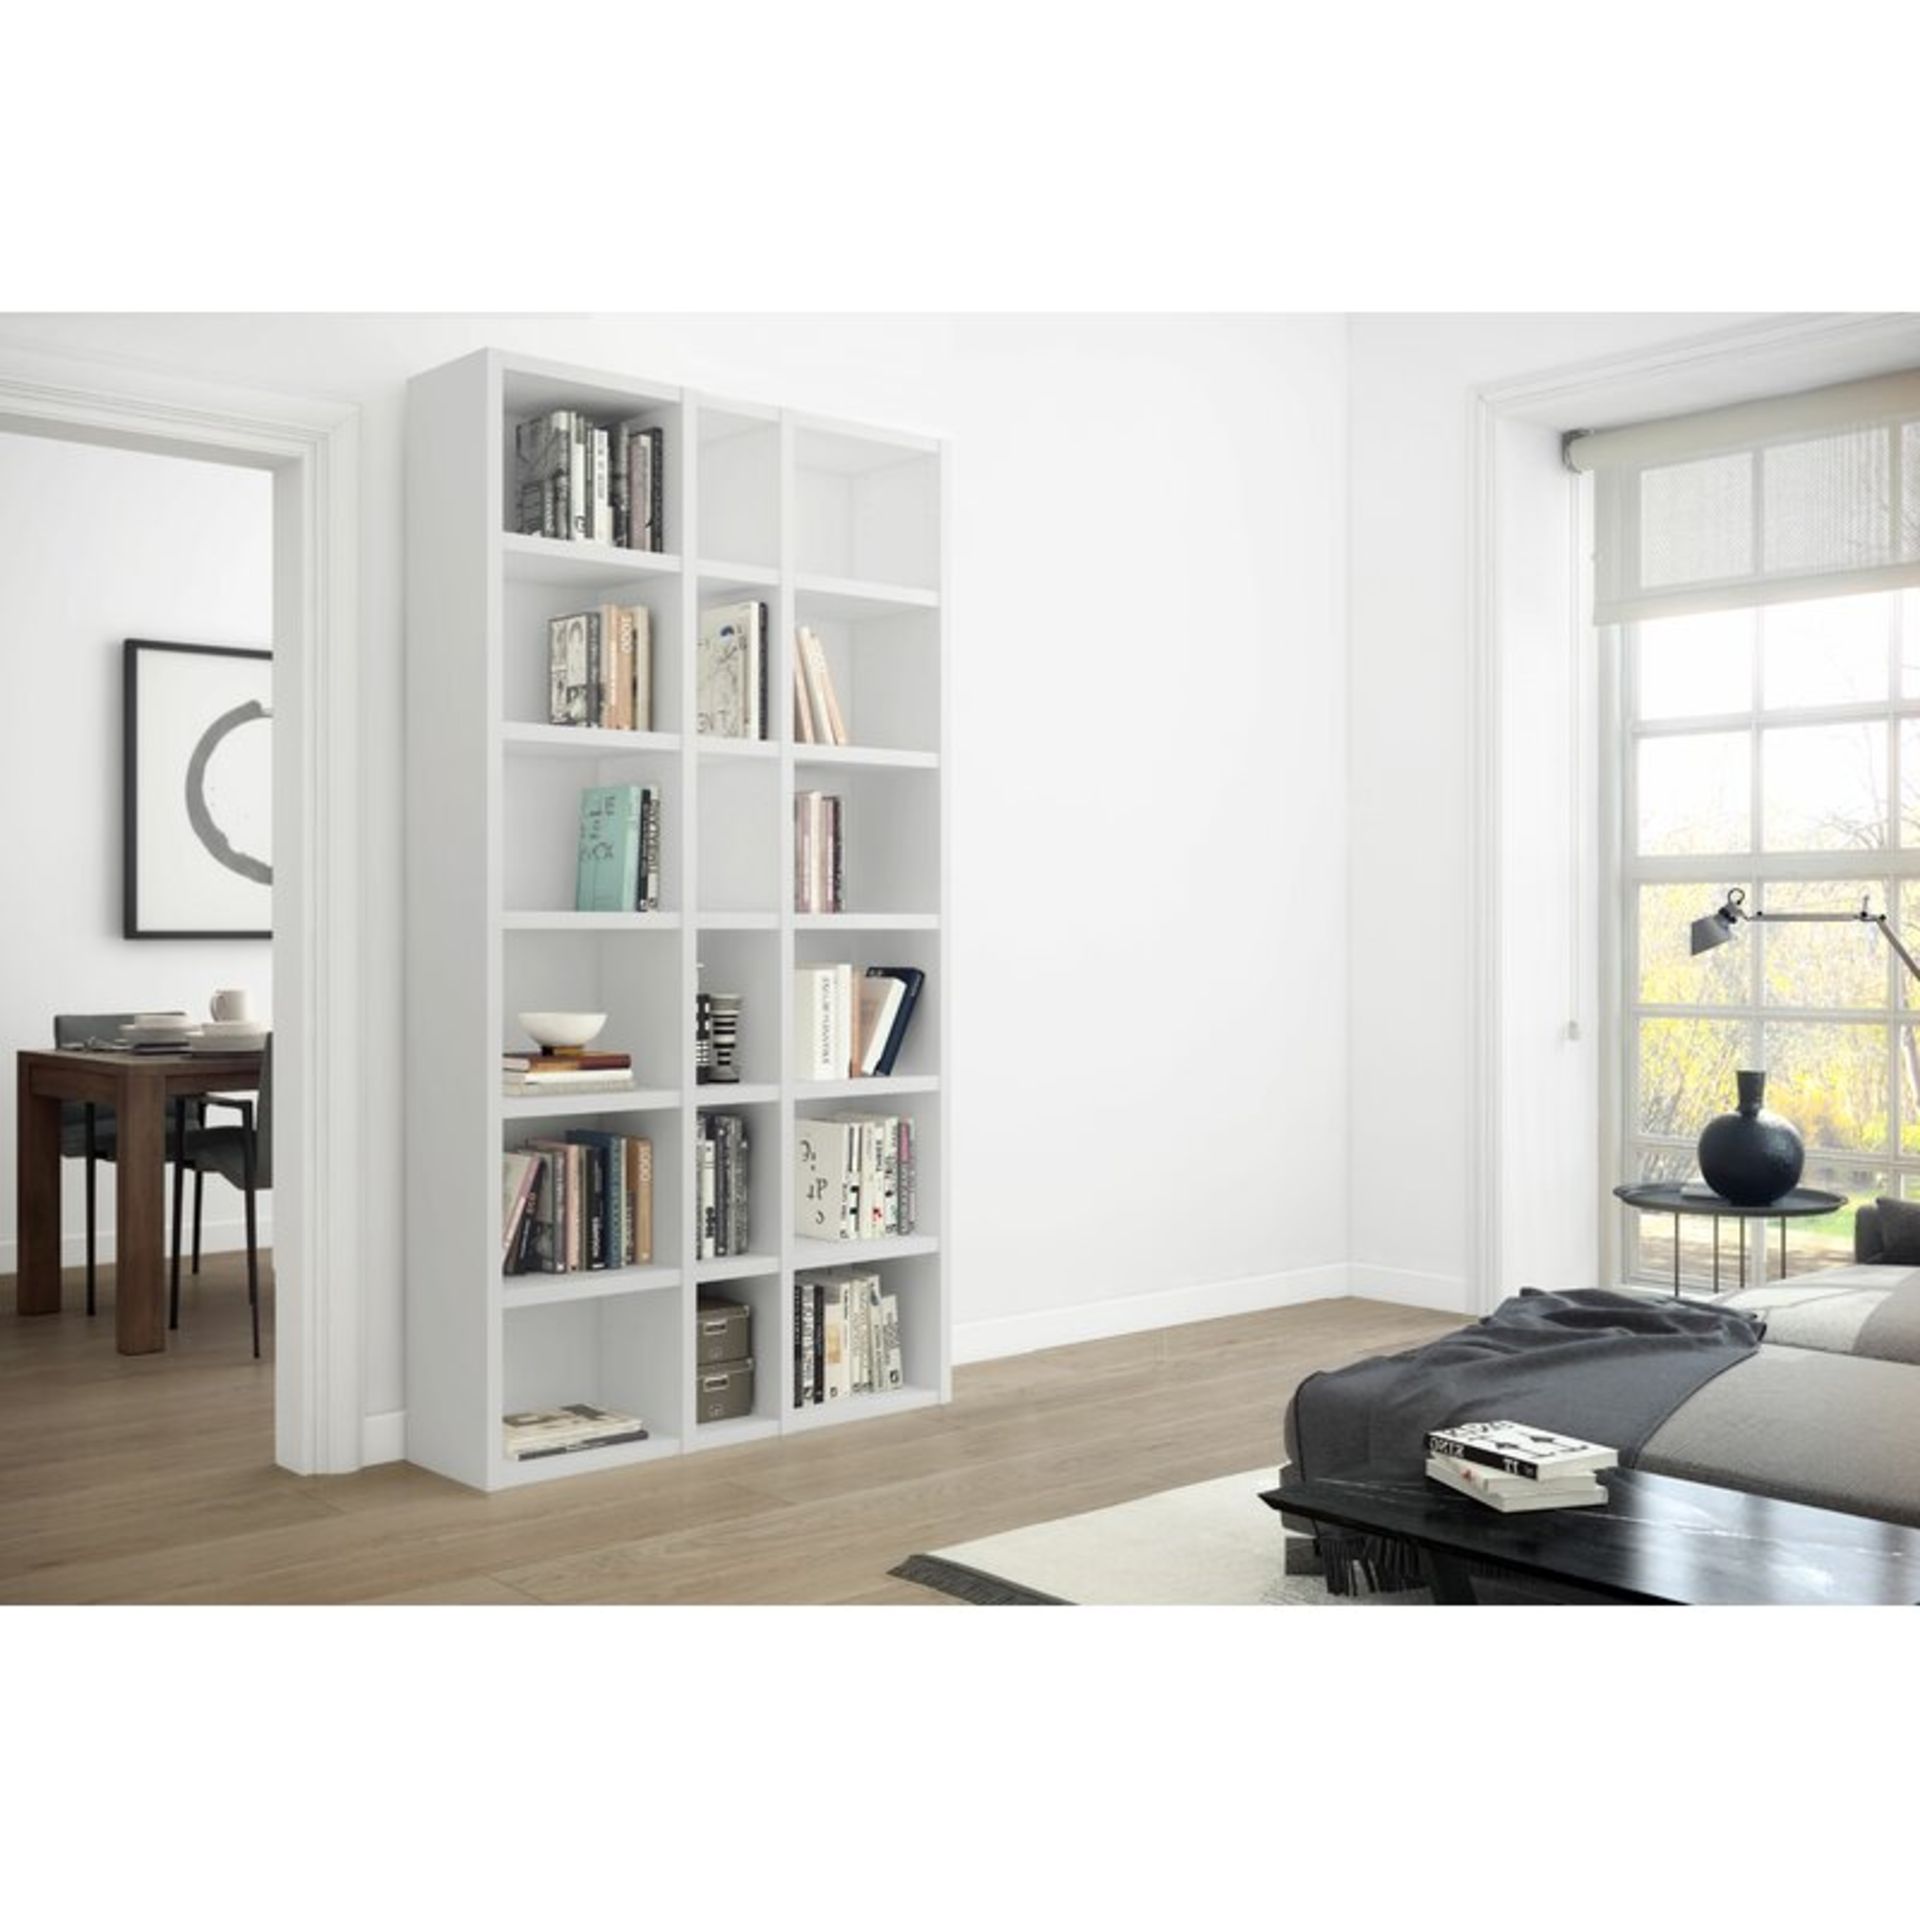 Jena fitted bookcase 6 packs 221.3cm height approx 220cm length - Image 3 of 6